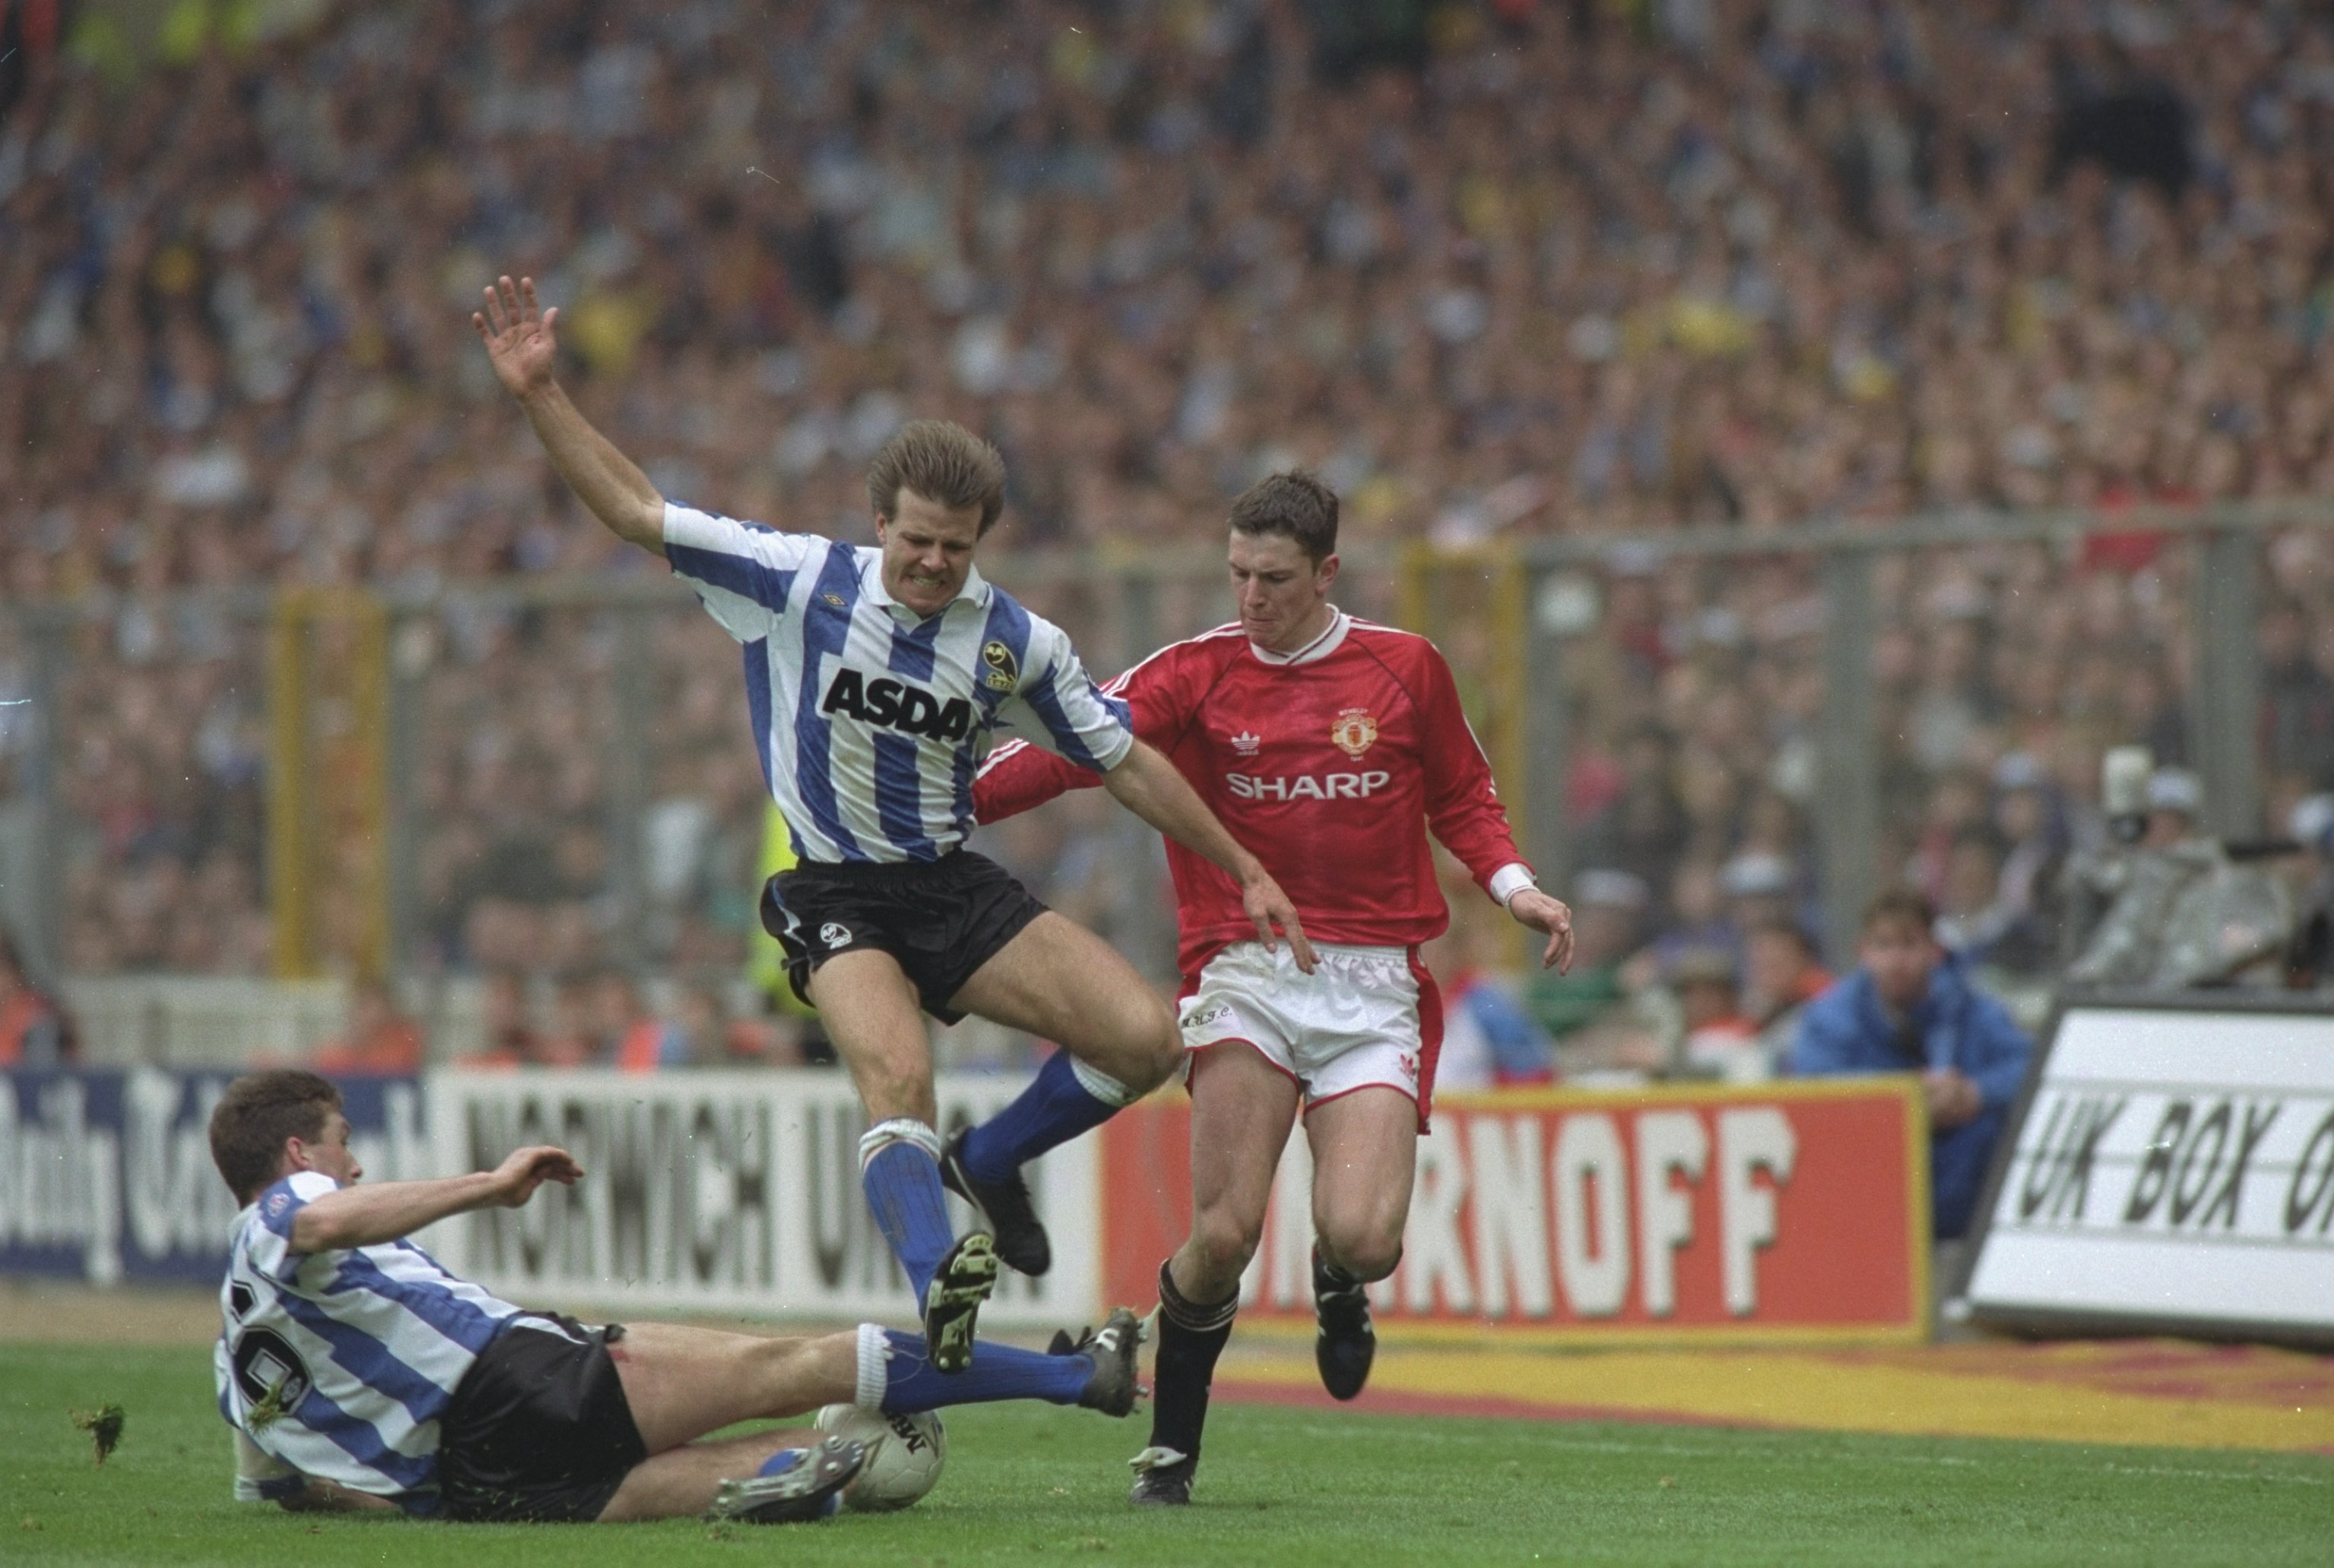 roland-nilsson-and-nigel-pearson-of-sheffield-wednesday-and-lee-sharpe-of-manchester-united.jpg